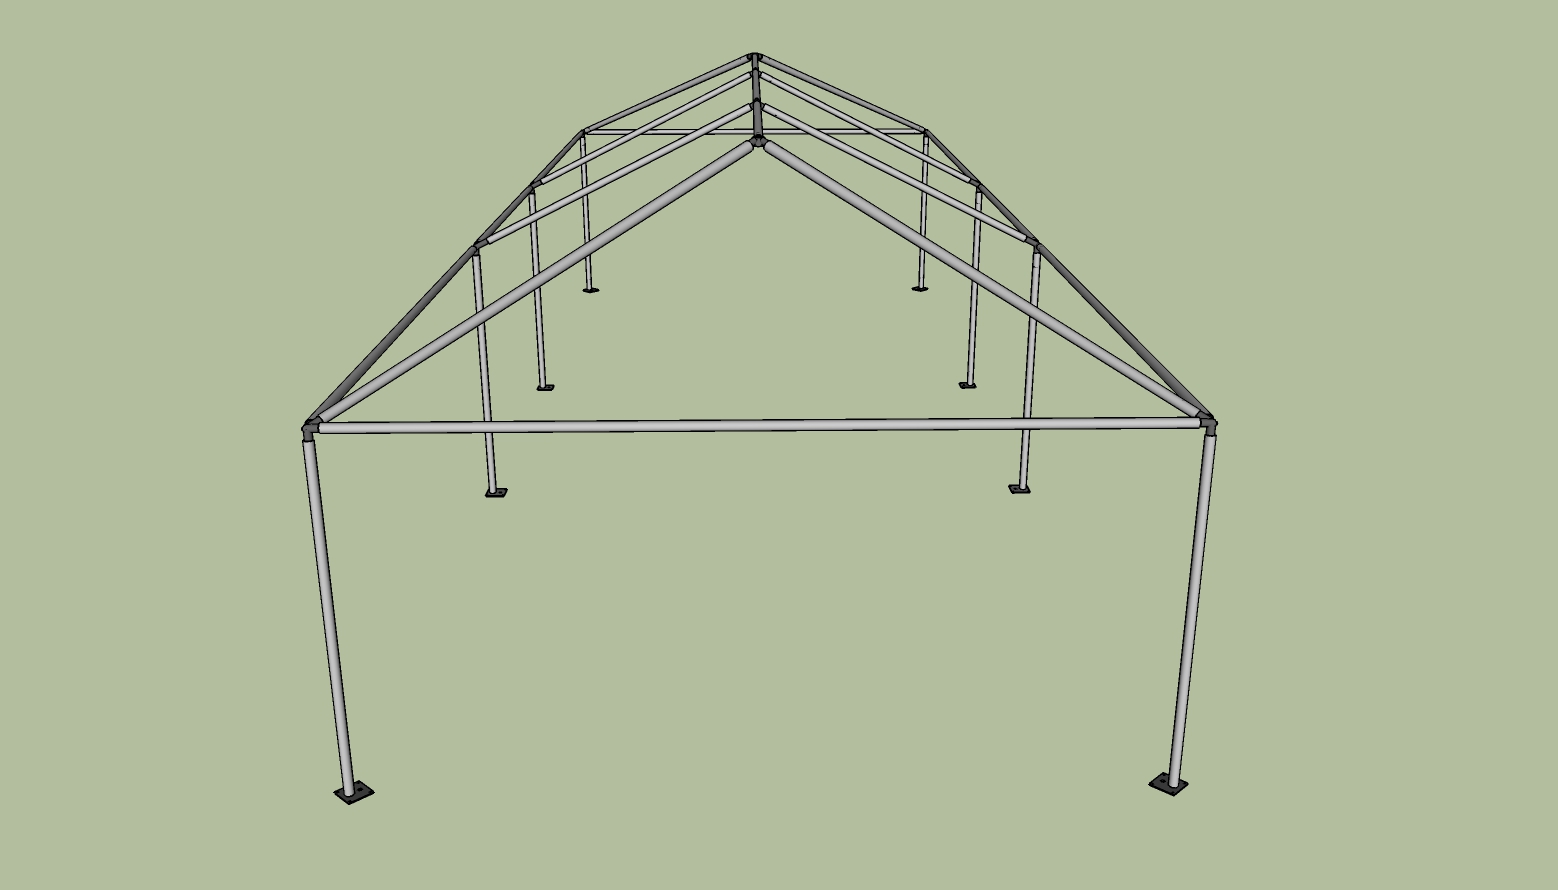 15x40 frame tent side view